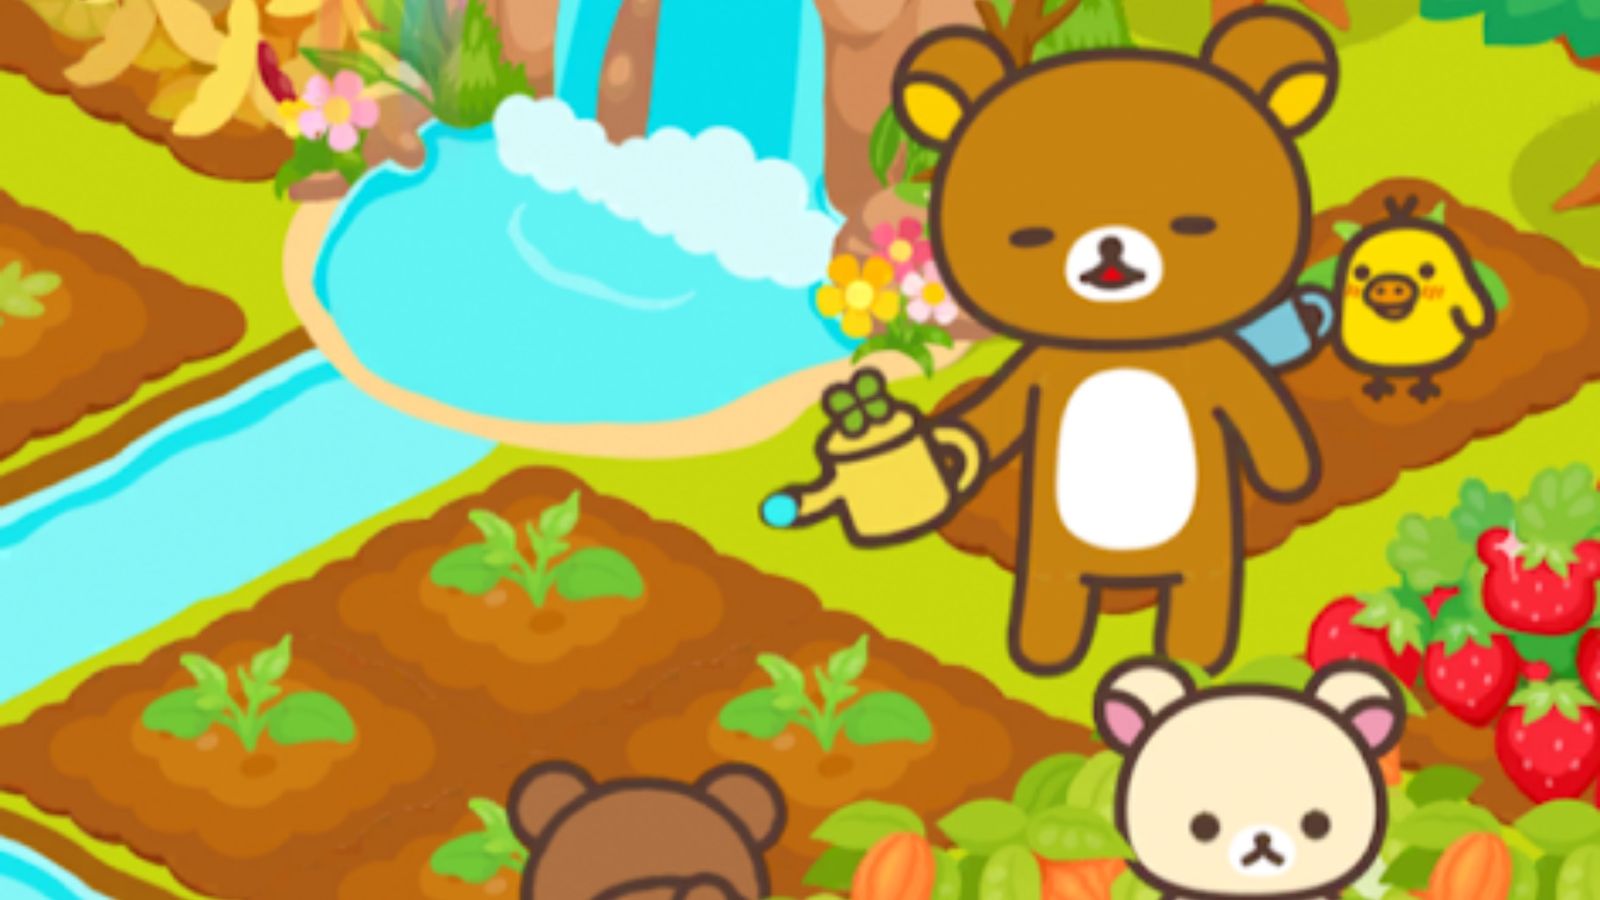 Rilakkuma Farm is one of the best Android farming games with a cutesy anime twist.